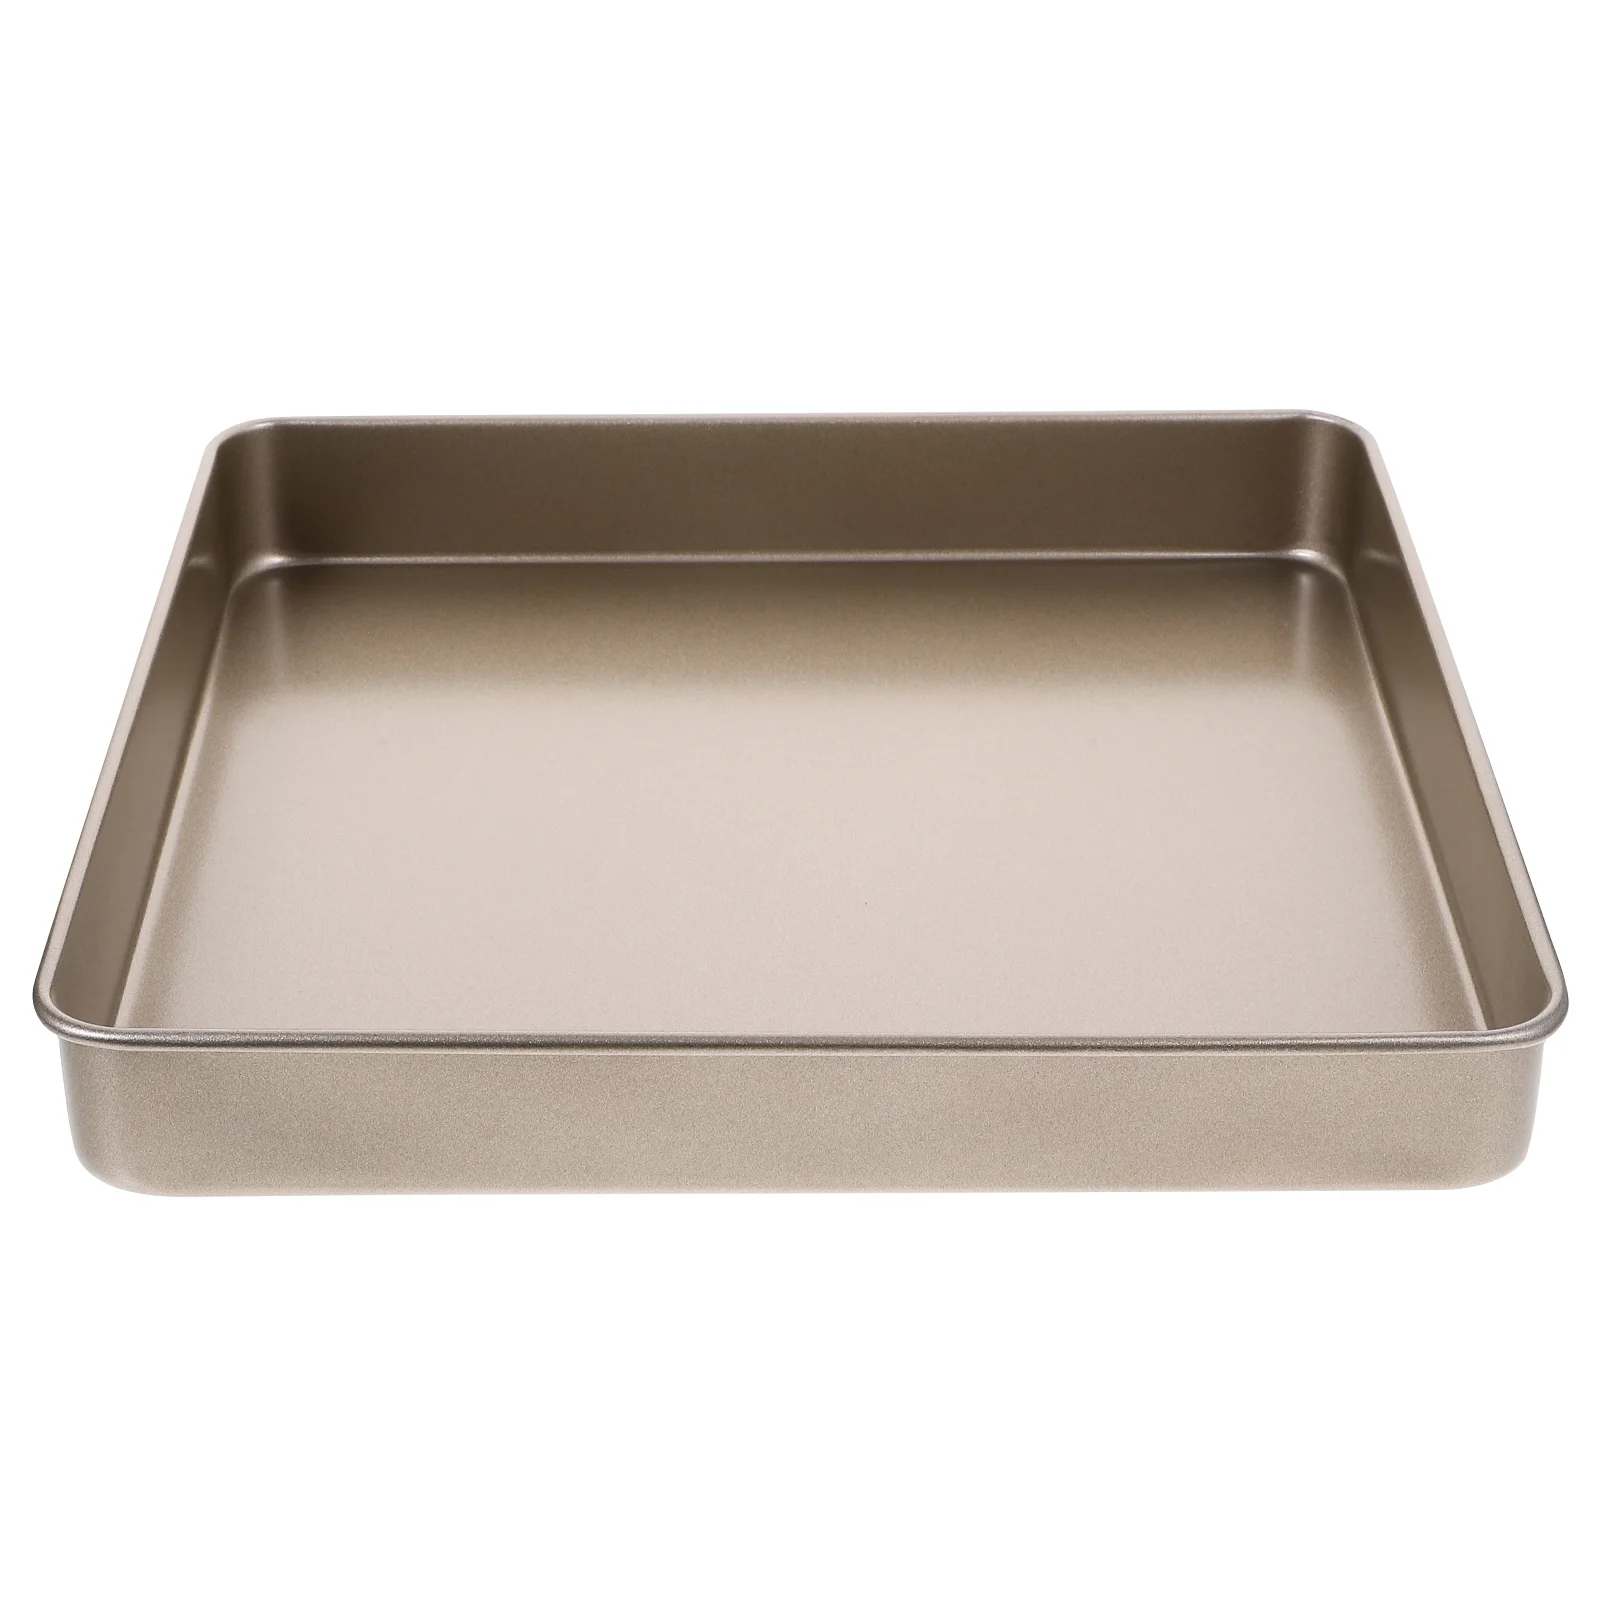 

11-inch Square Non-stick Baking Pan Cake Biscuit Mold for Oven Cookie Pans Kitchen Roasting Bakeware Tray Layer Molds